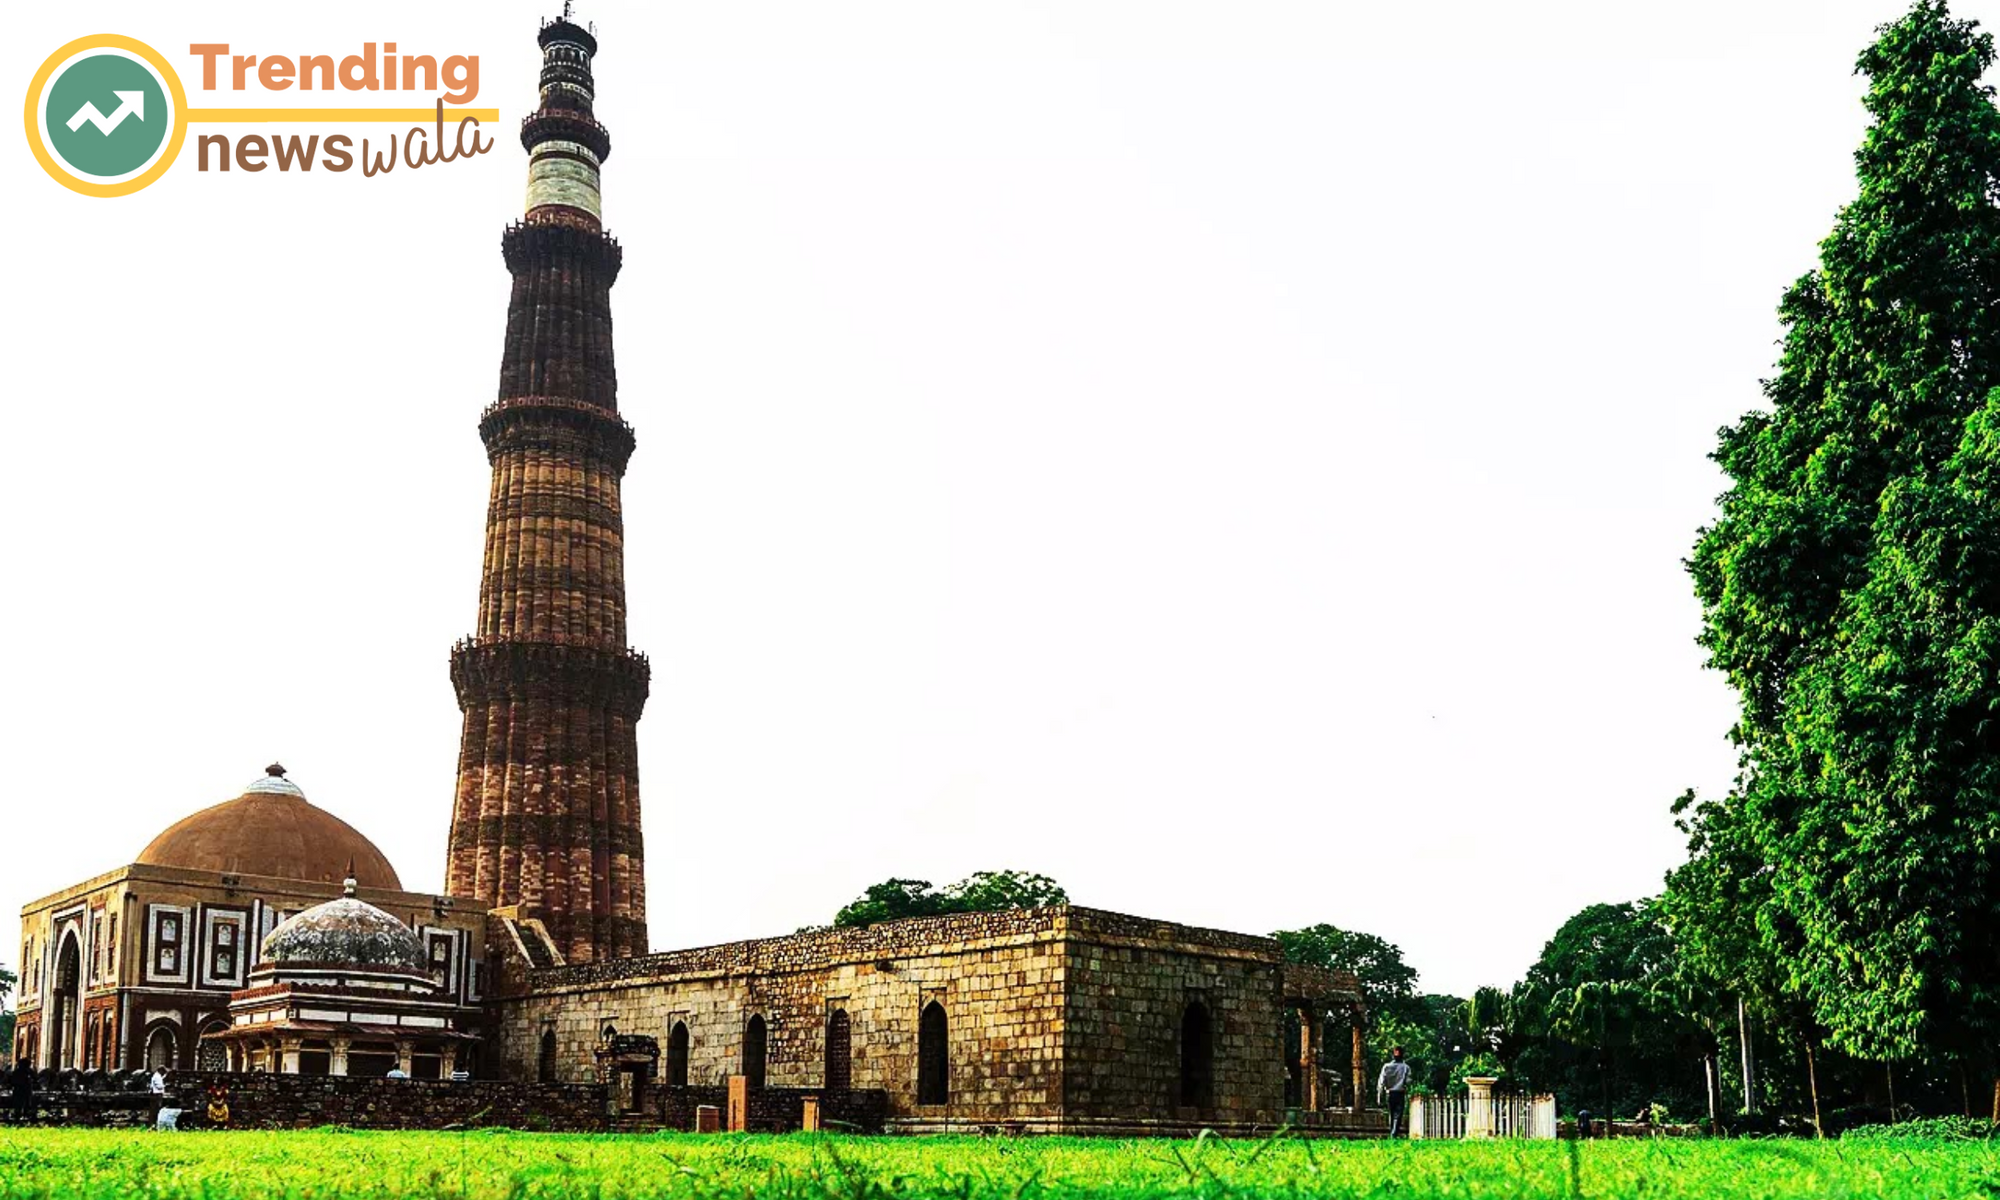 Qutub Minar and its complex were designated as a UNESCO World Heritage Site in 1993